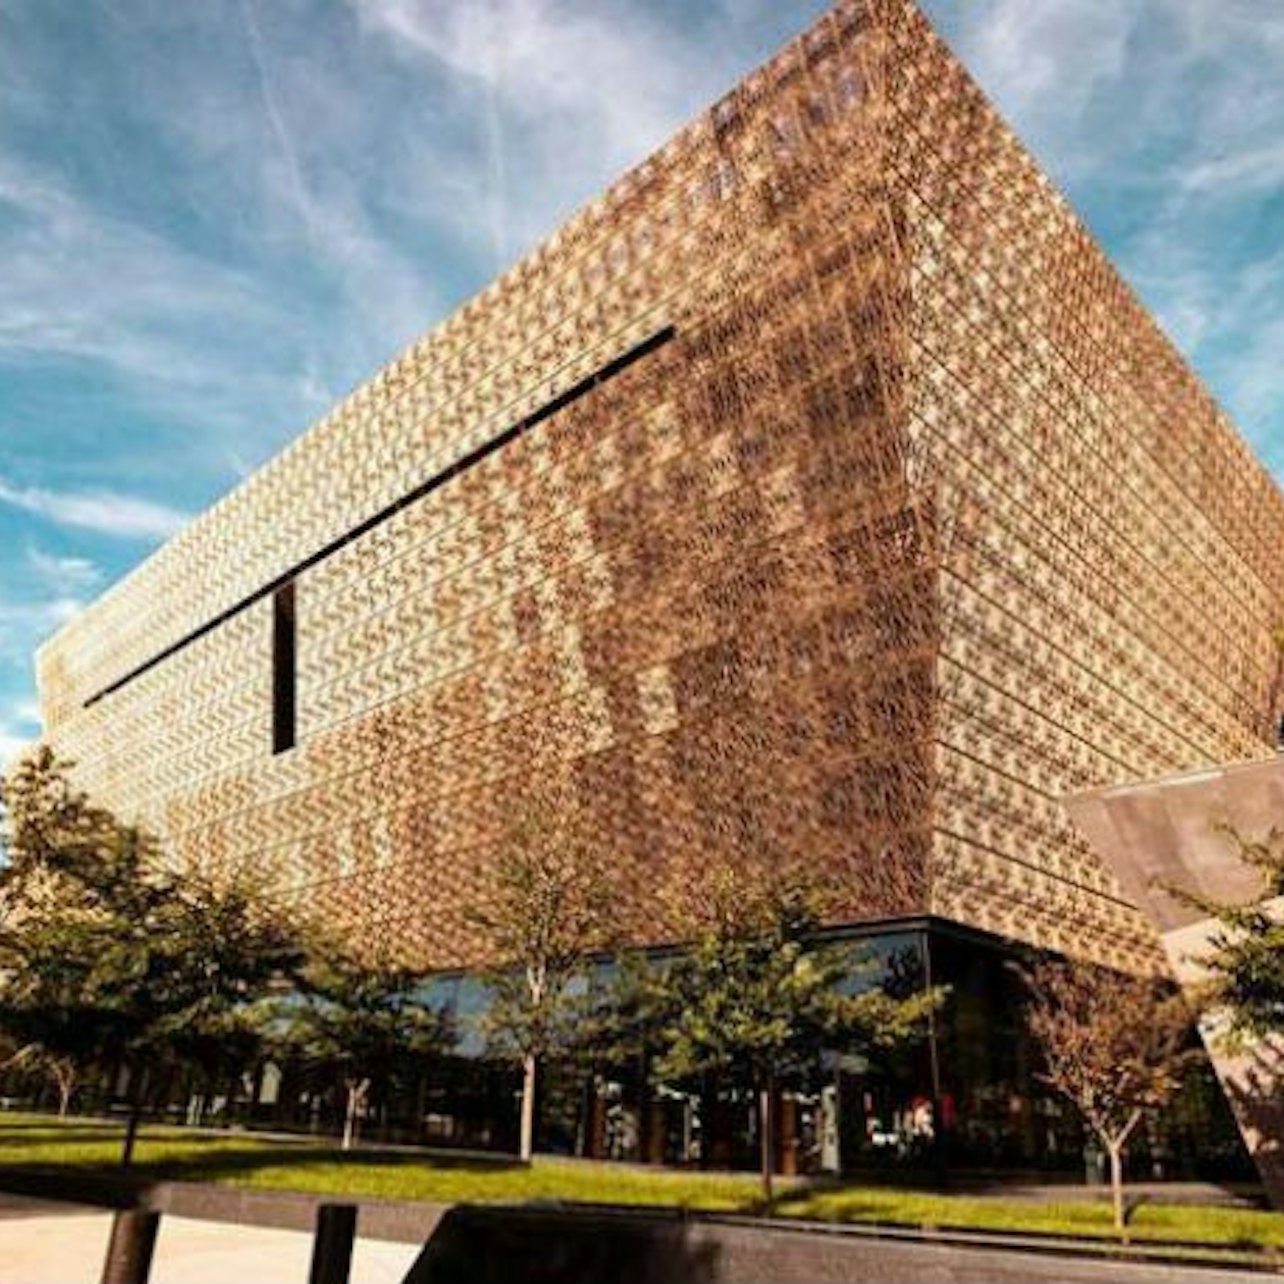 African American Tour and National Museum of African American History & Culture - Accommodations in Washington D.C.